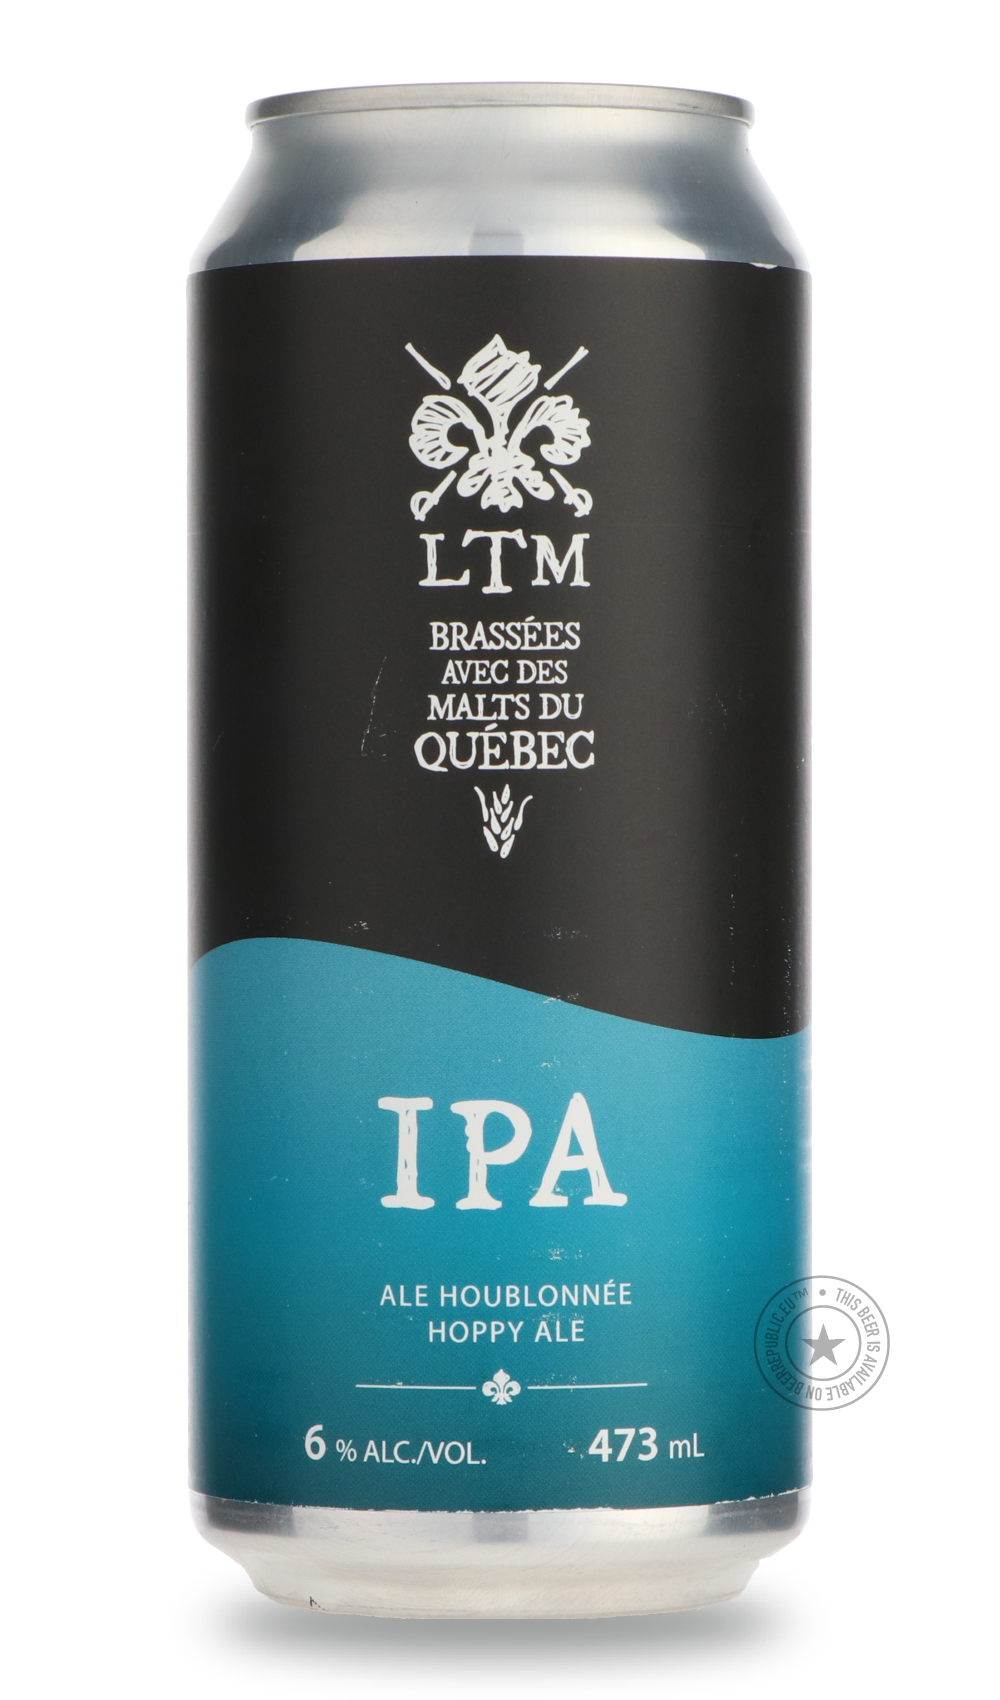 -Les Trois Mousquetaires- IPA-IPA- Only @ Beer Republic - The best online beer store for American & Canadian craft beer - Buy beer online from the USA and Canada - Bier online kopen - Amerikaans bier kopen - Craft beer store - Craft beer kopen - Amerikanisch bier kaufen - Bier online kaufen - Acheter biere online - IPA - Stout - Porter - New England IPA - Hazy IPA - Imperial Stout - Barrel Aged - Barrel Aged Imperial Stout - Brown - Dark beer - Blond - Blonde - Pilsner - Lager - Wheat - Weizen - Amber - Bar